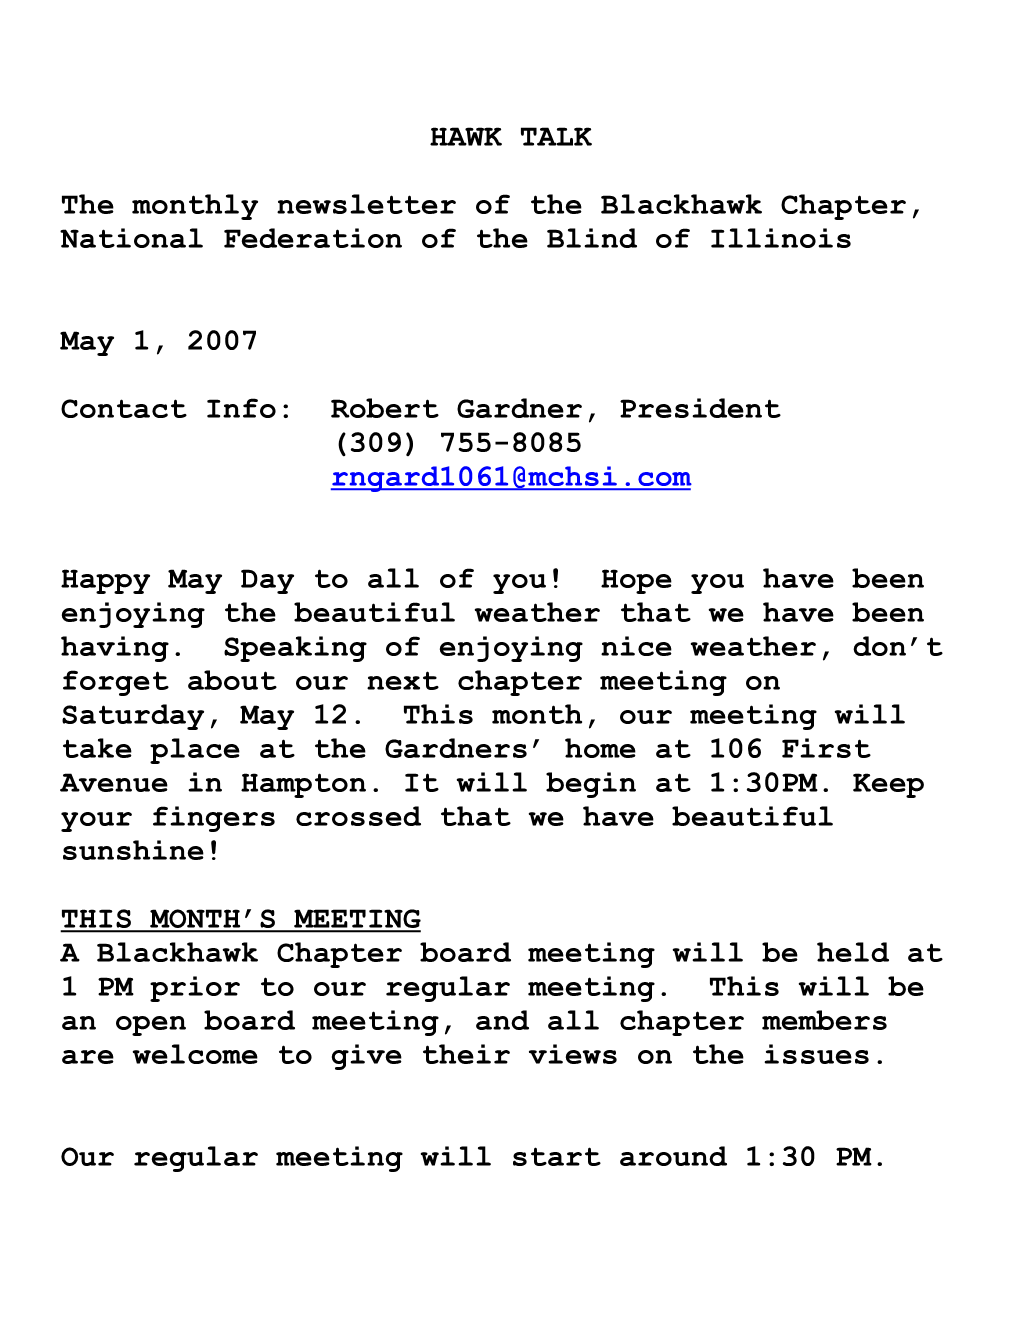 The Monthly Newsletter of the Blackhawk Chapter